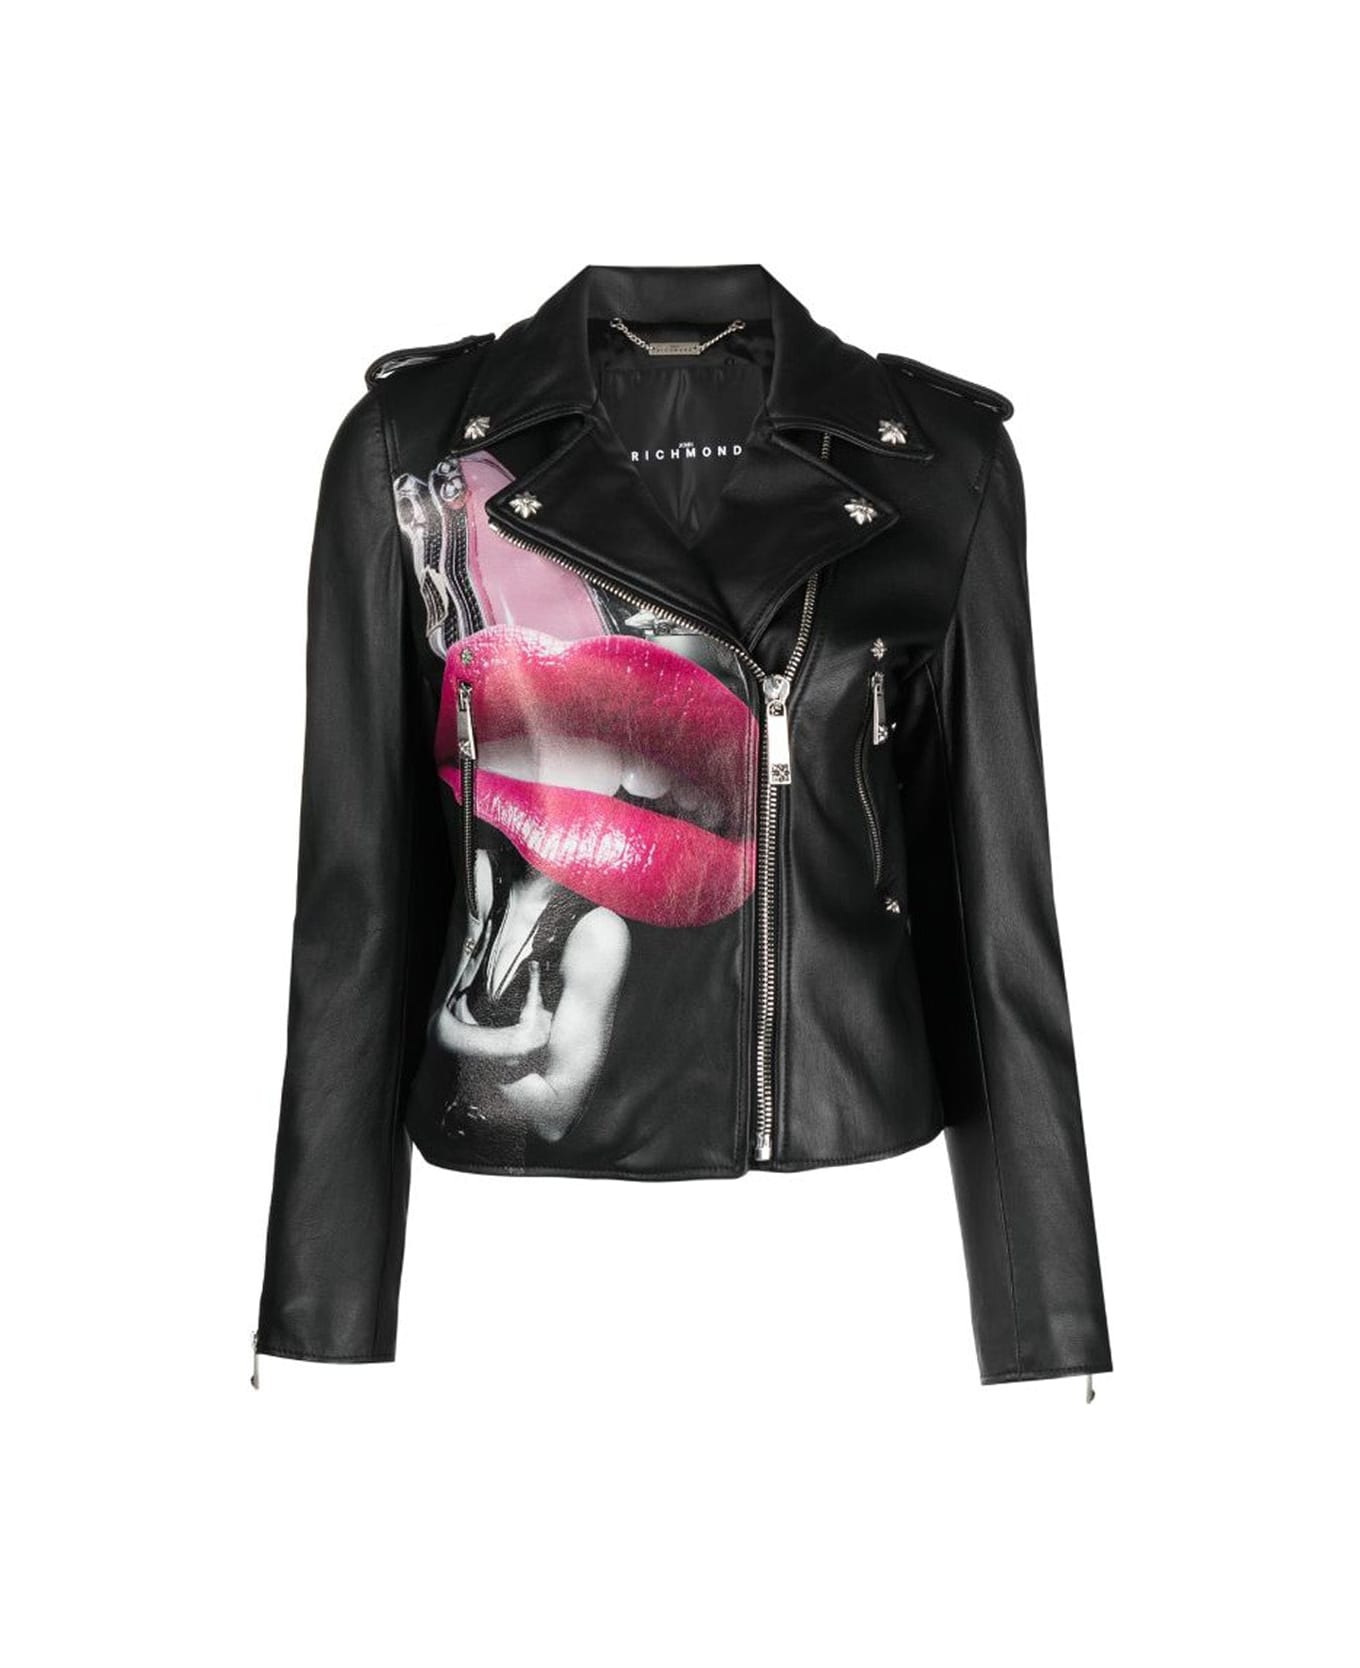 John Richmond 100% Leather Jacket With Heat Pressed Print. Decentralised Fastener By Contrasting Zip. - Nero